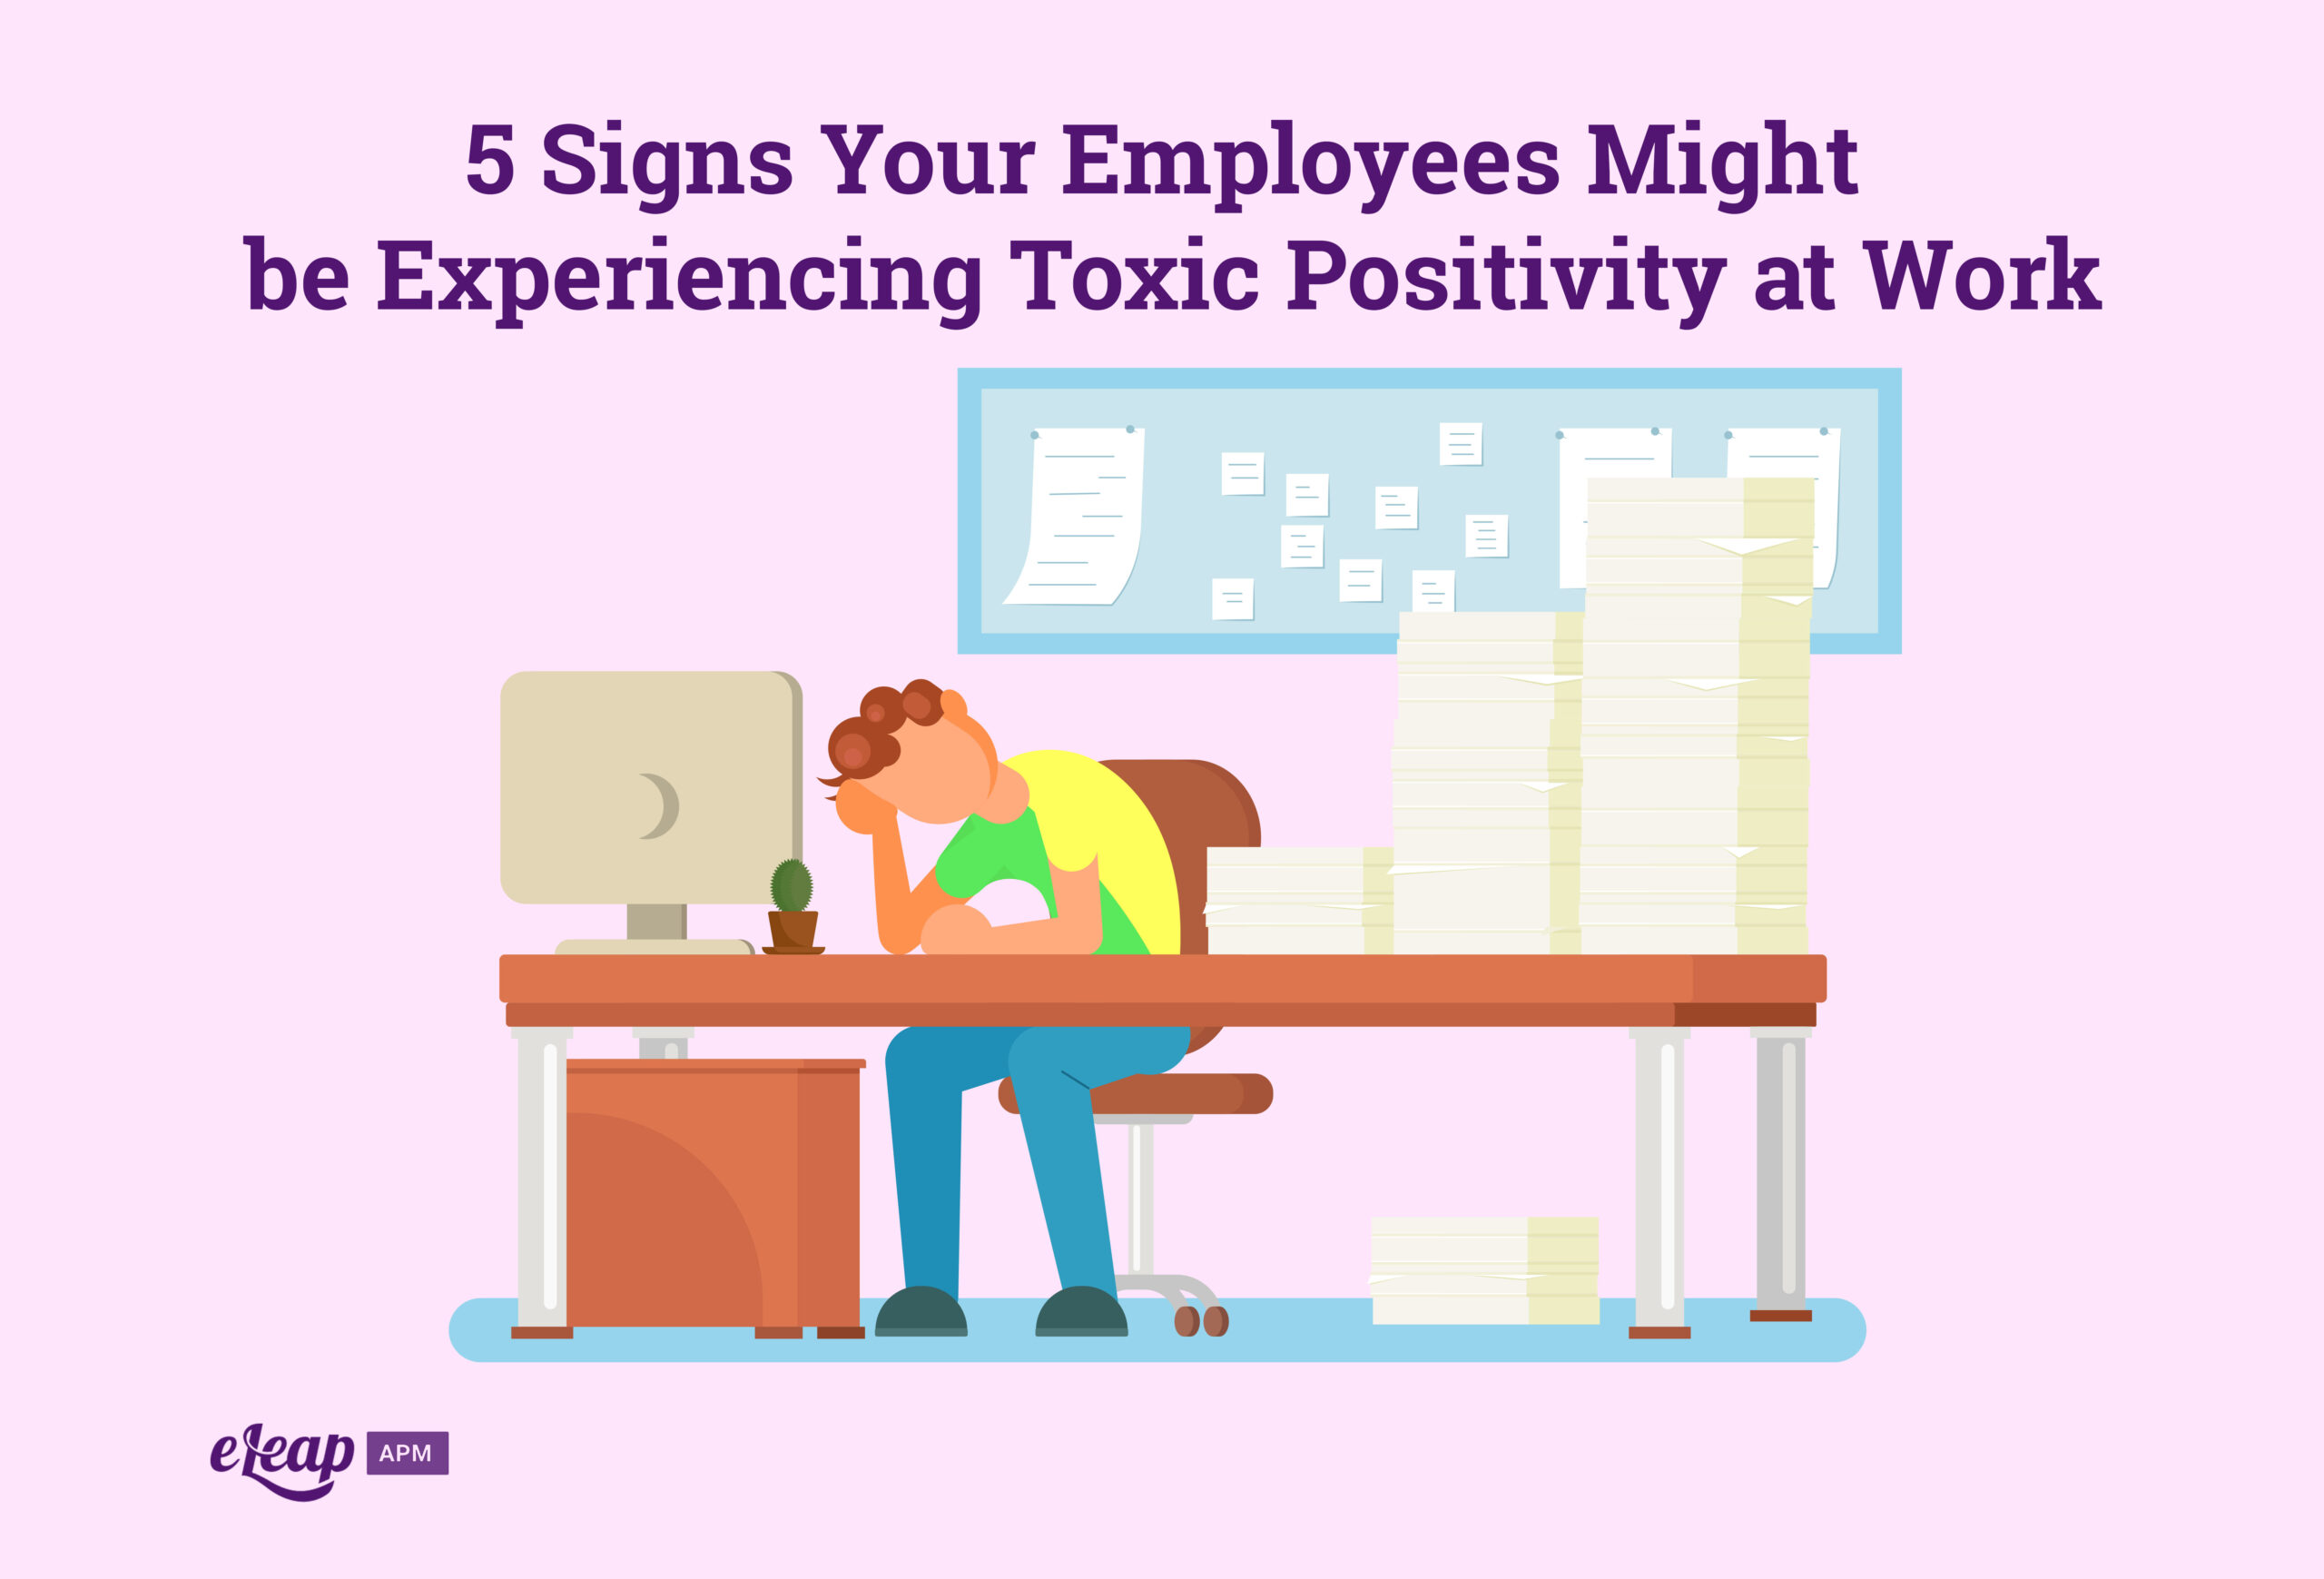 5 Signs Your Employees Might be Experiencing Toxic Positivity at Work